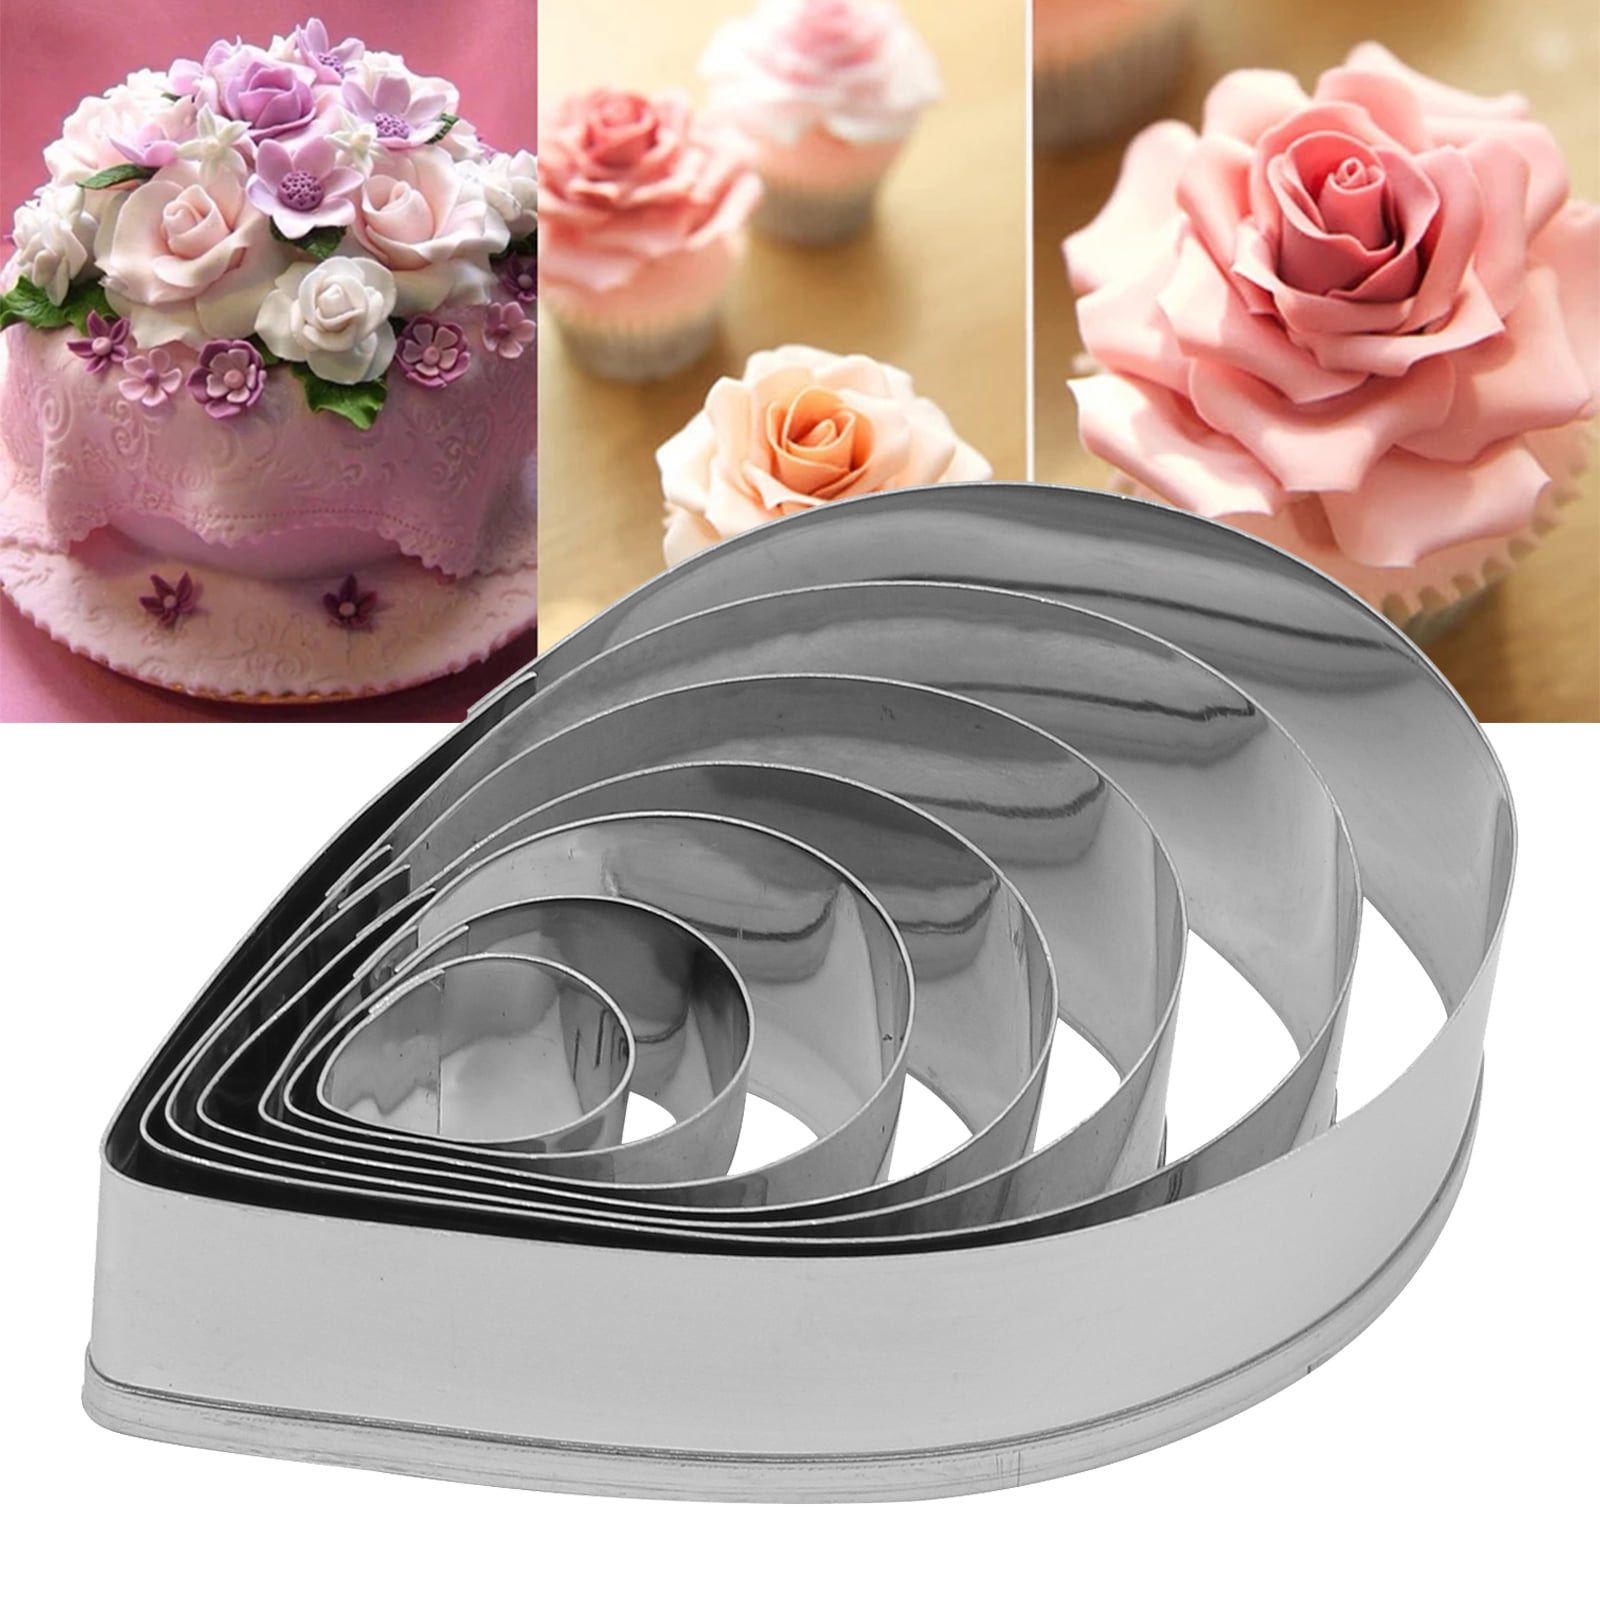 Orchard Product ROSE CALYX Icing Sugarcraft Gum Paste Cutter for Cake Decorating 